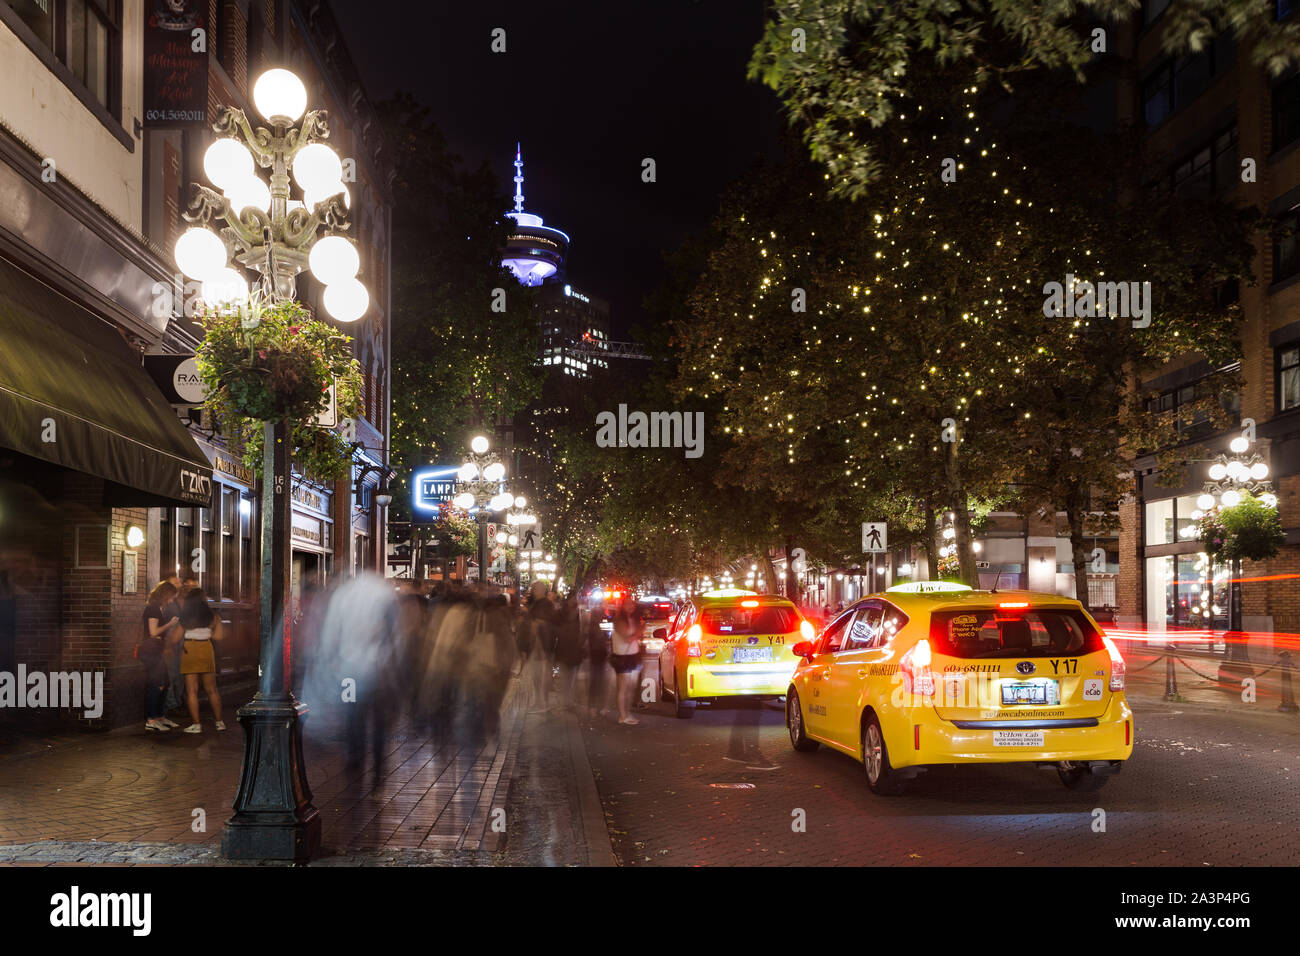 VANCOUVER, BC, CANADA - SEPT 1, 2019: Water Street in Vancouver's Gastown on a busy Friday night. Stock Photo